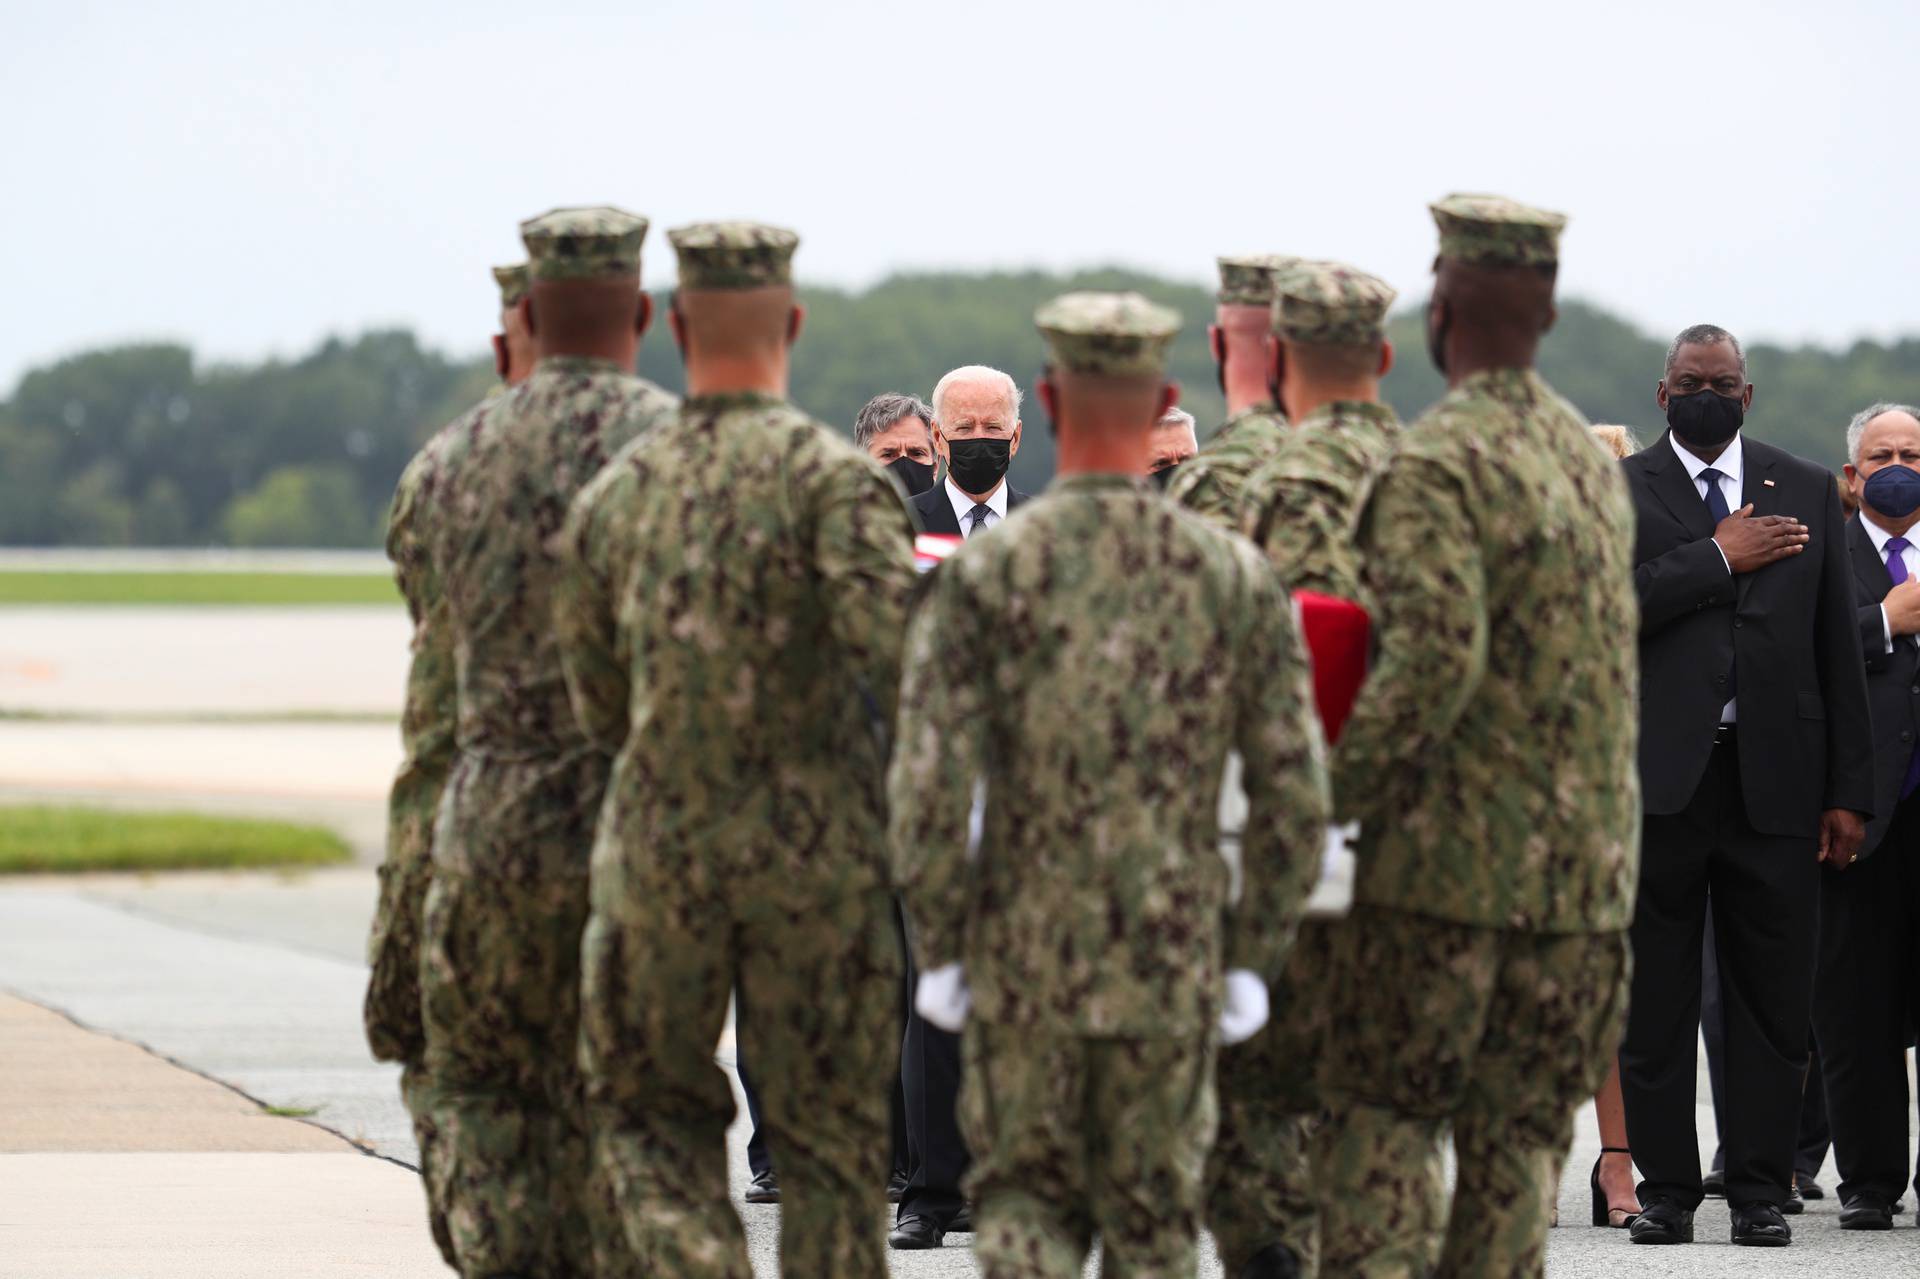 U.S. President Joe Biden salutes during the dignified transfer of the remains of U.S. Military service members who were killed by a suicide bombing at the Hamid Karzai International Airport